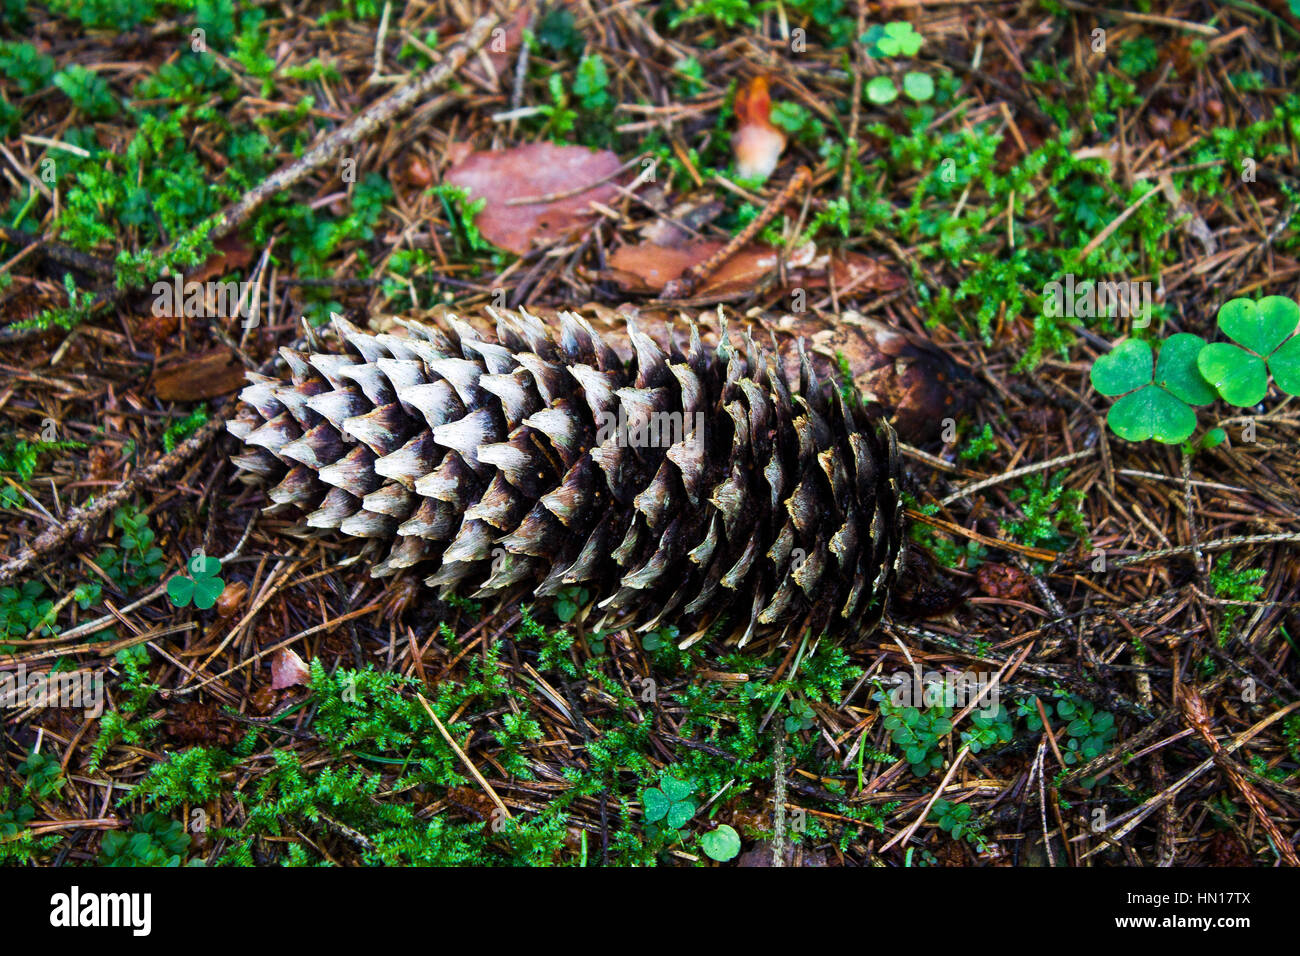 the pine cone in the wood on a green moss Stock Photo